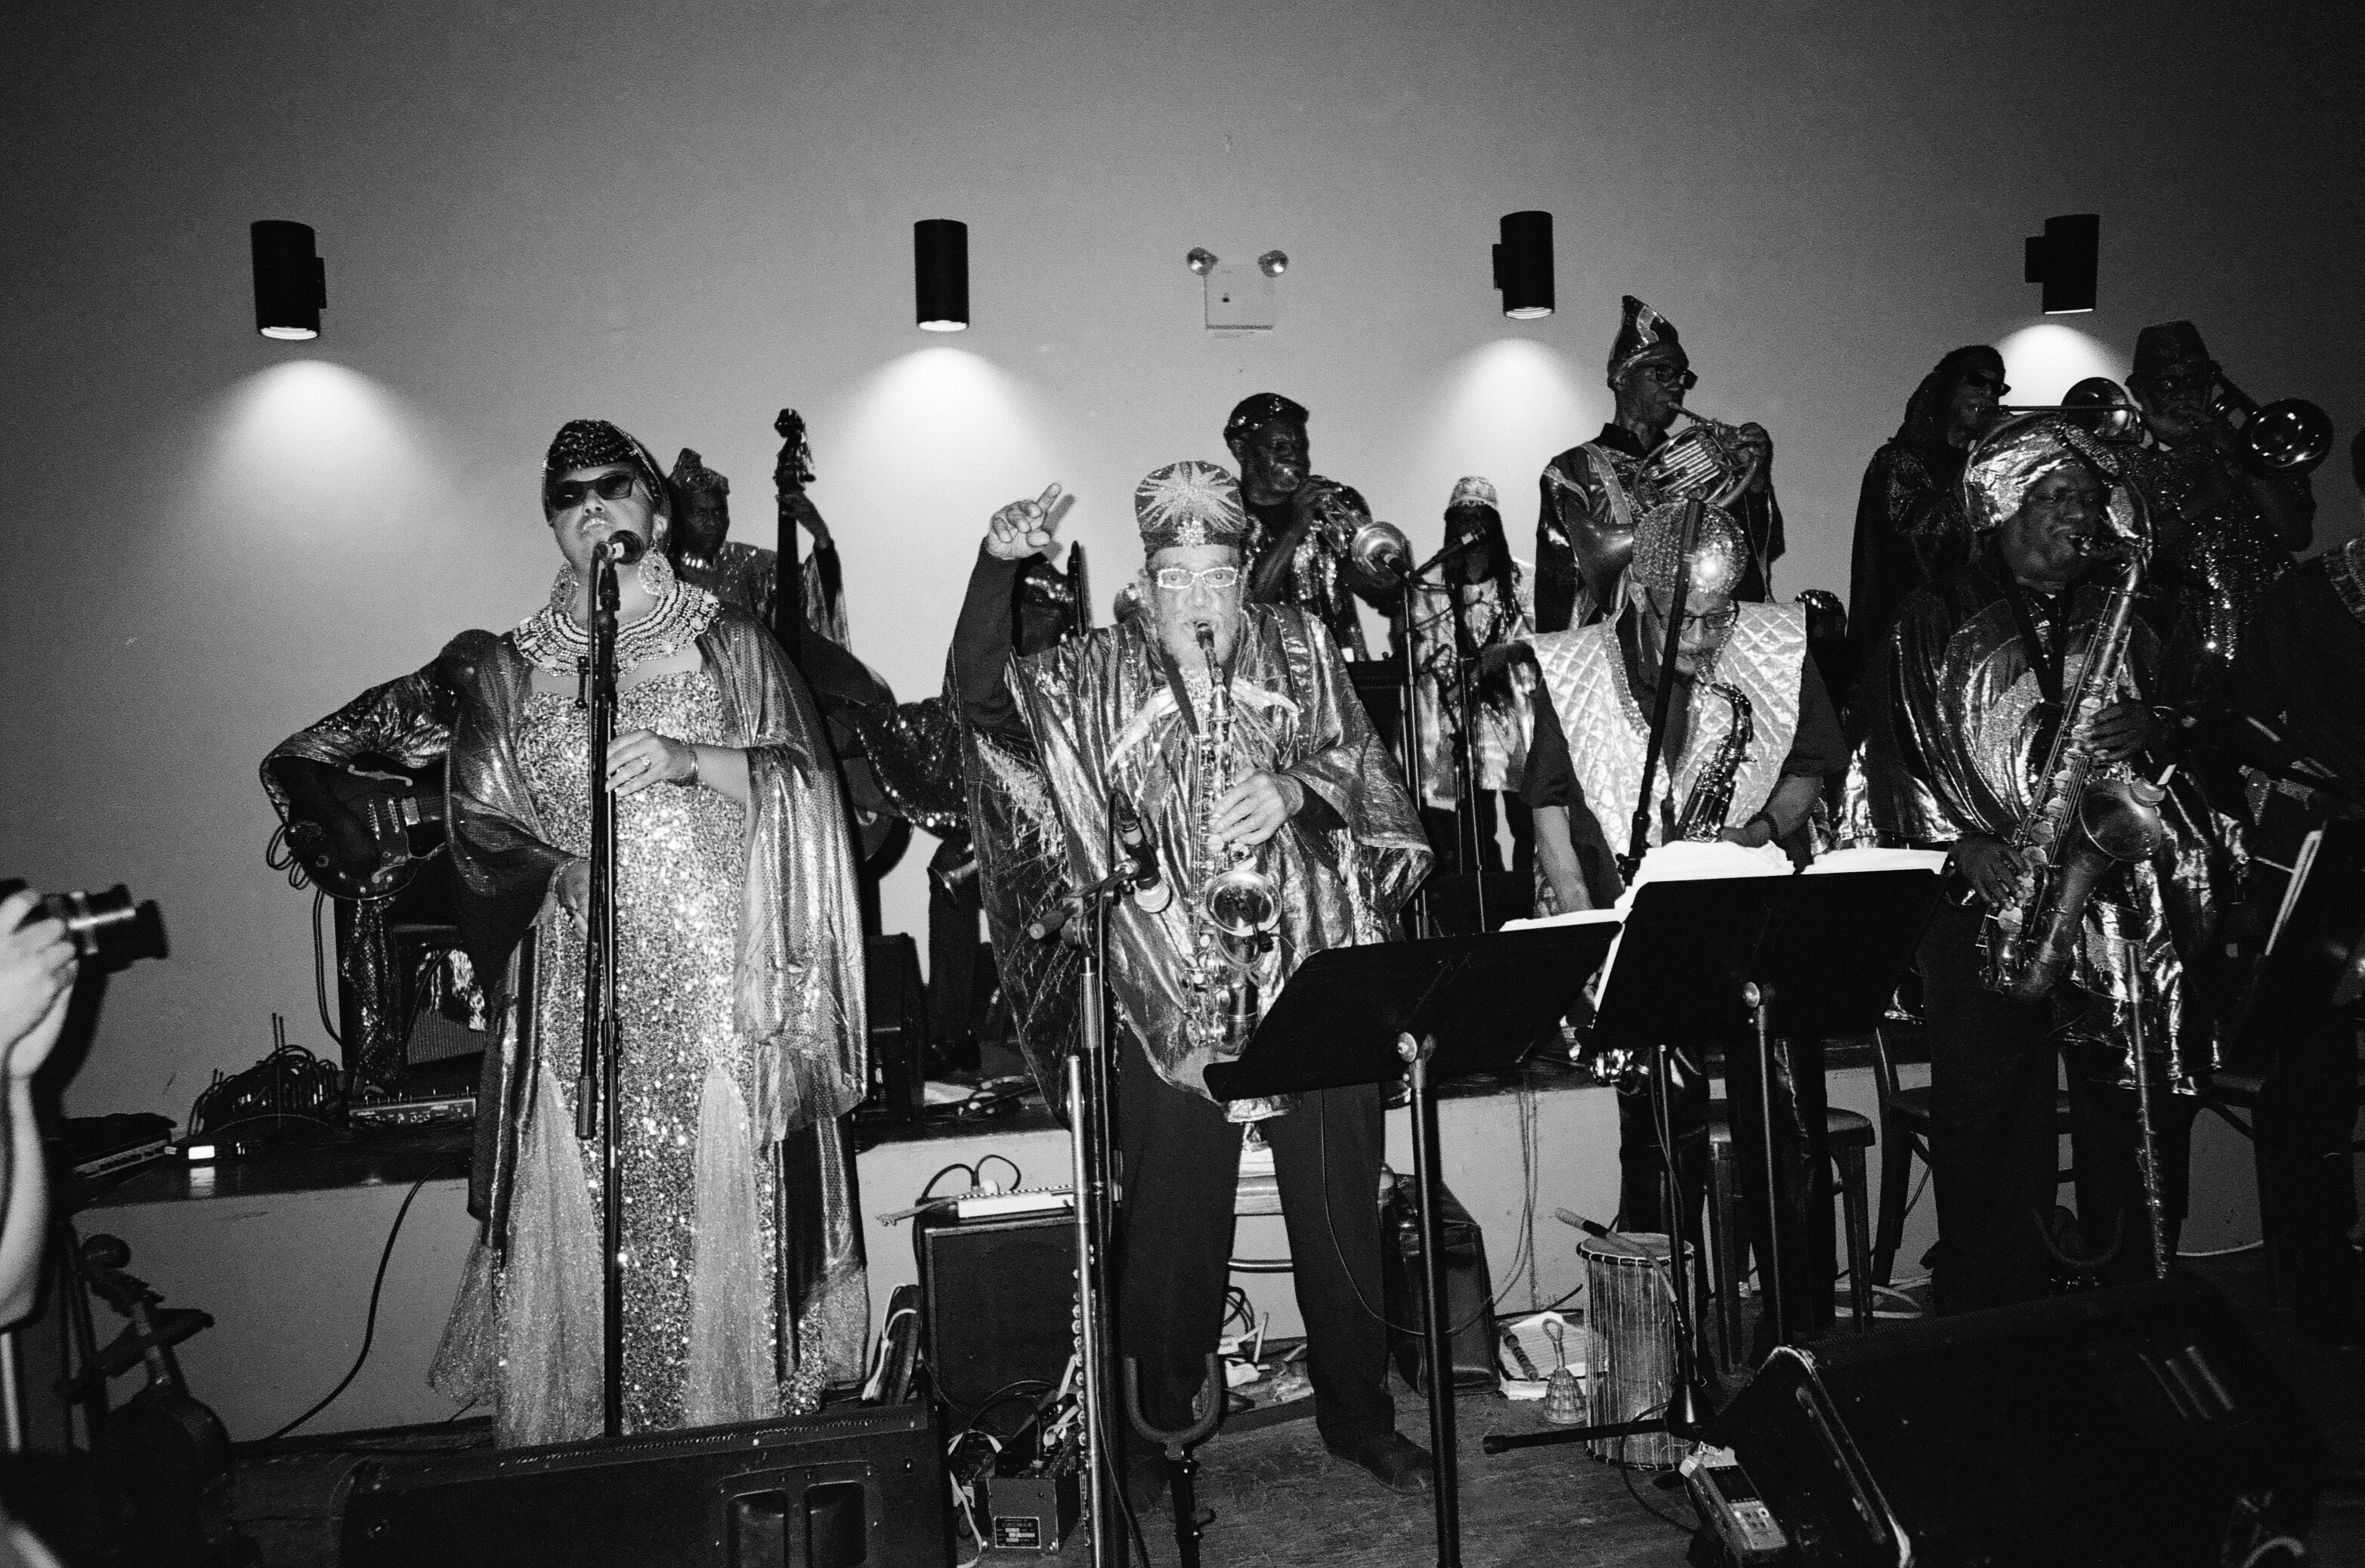 Sun Ra Arkestra at 2018 benefit, photographed by Andrew Lampert.